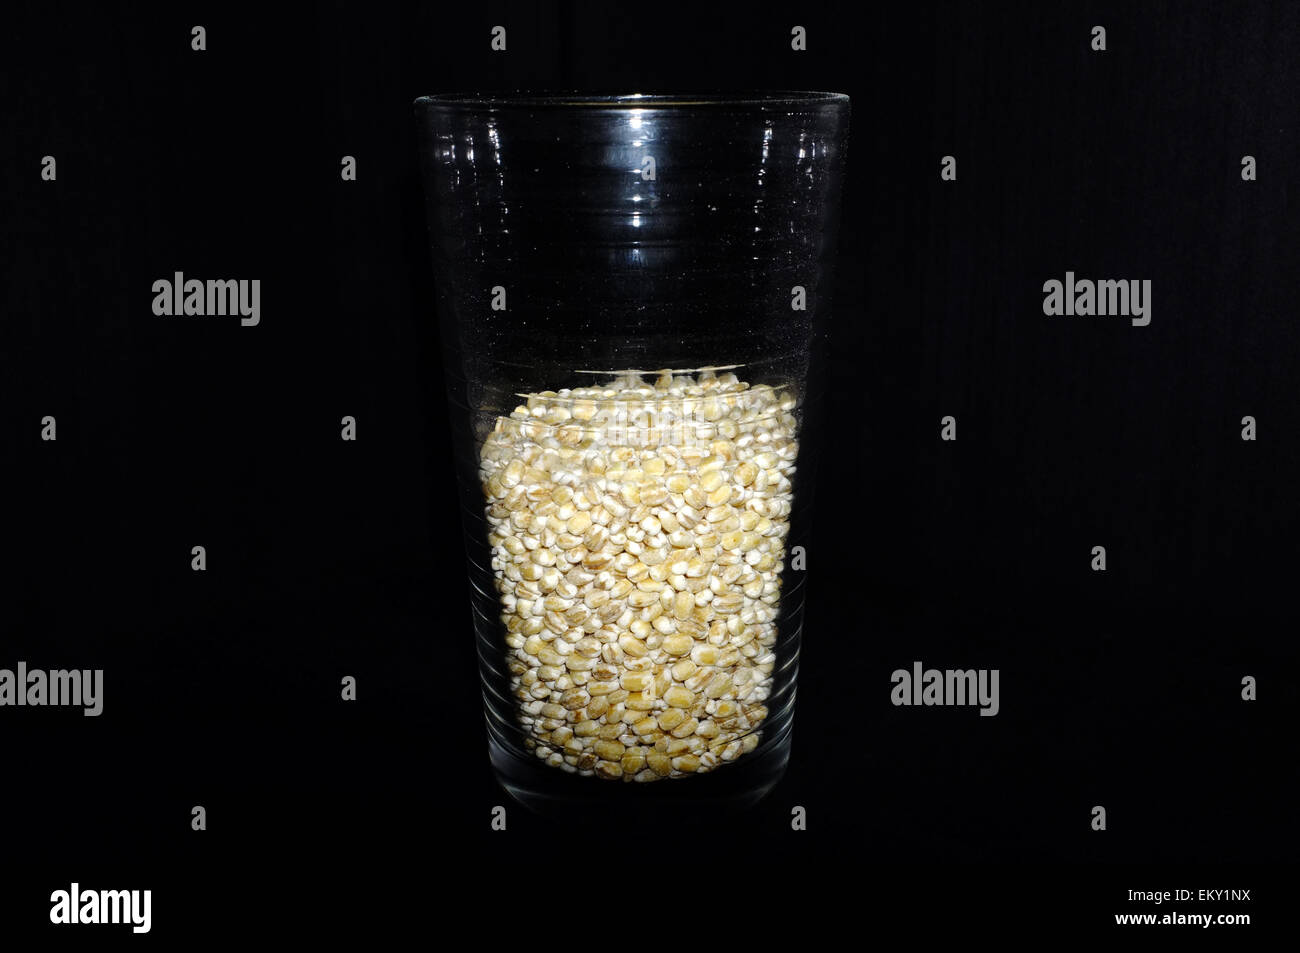 A glass half full/half empty of  photographed against a black background. Stock Photo